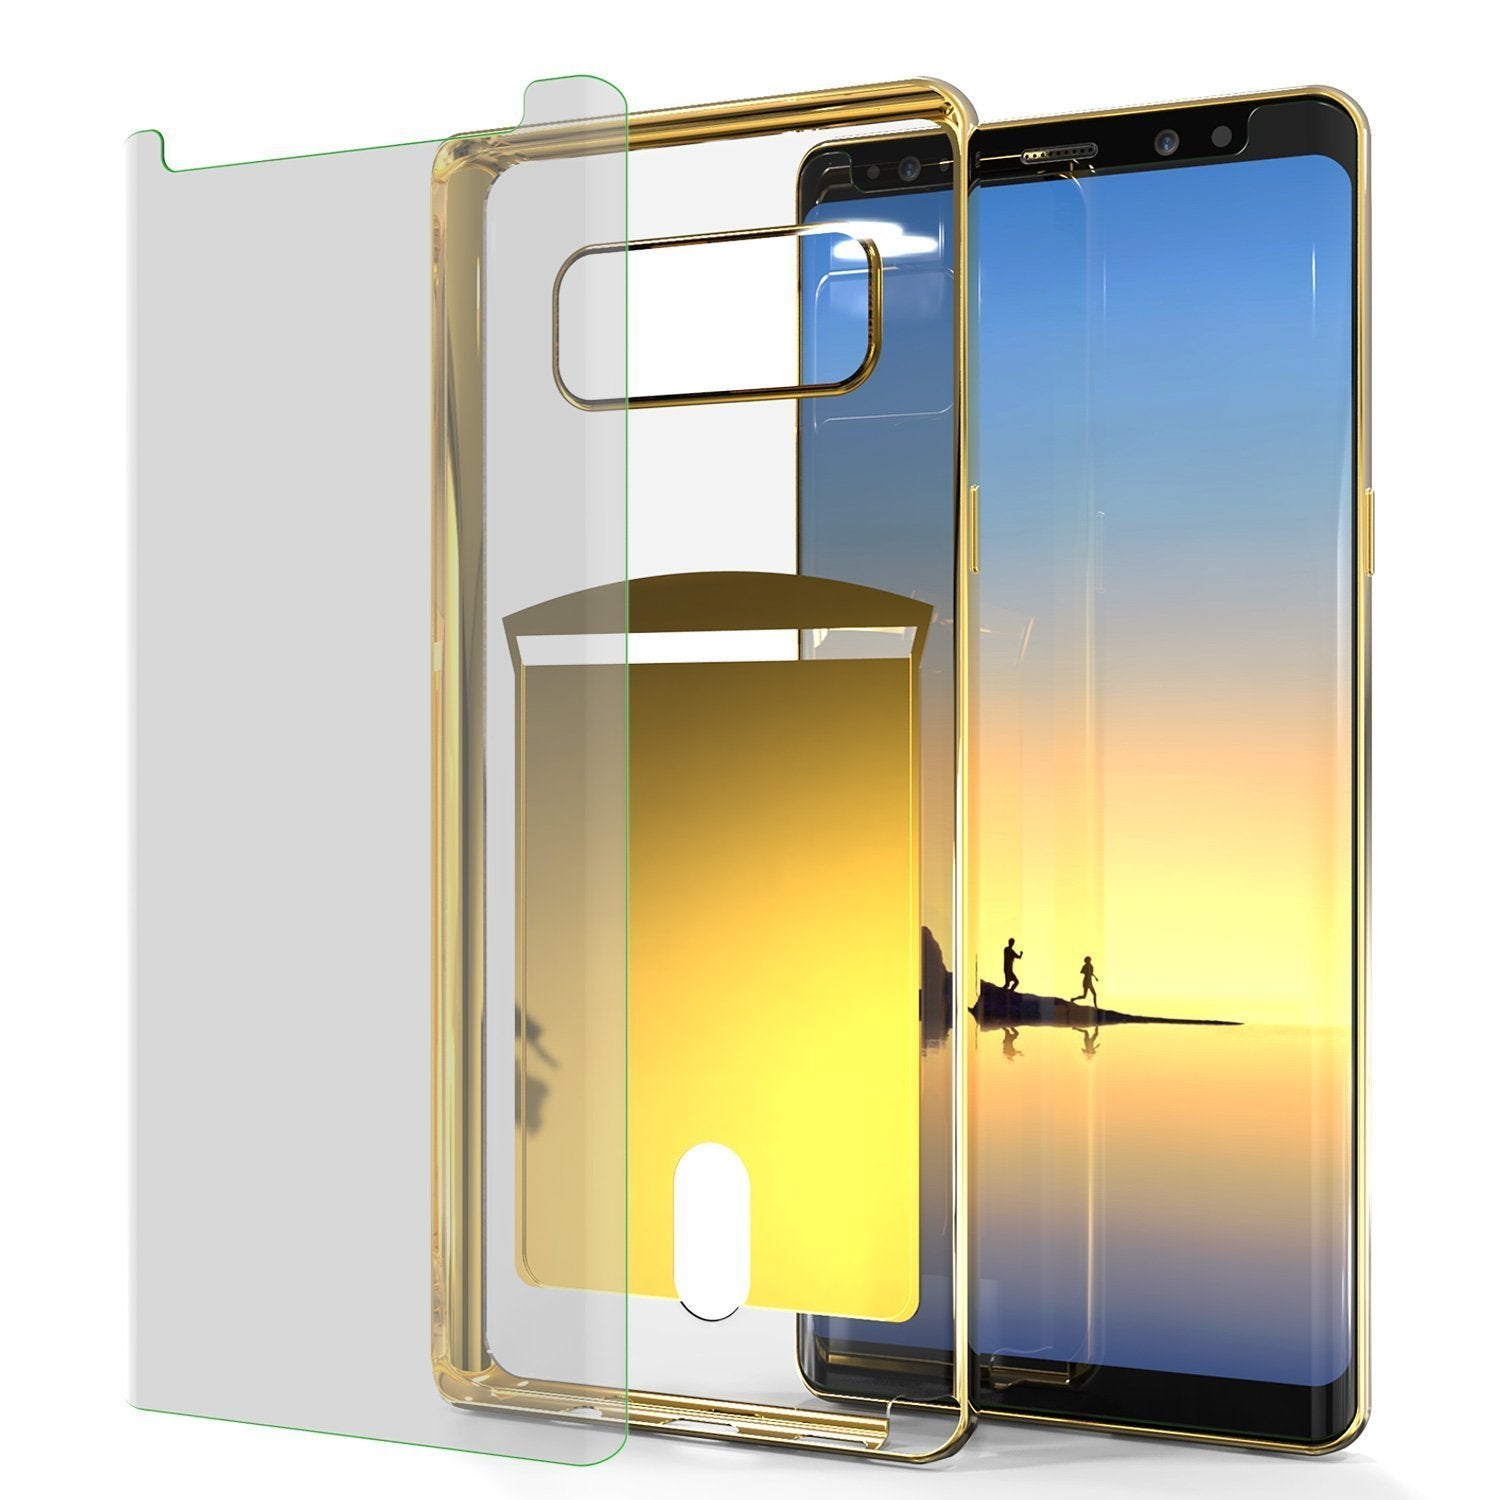 Galaxy Note 8 Punkcase LUCID Gold Series Shield Screen Protector